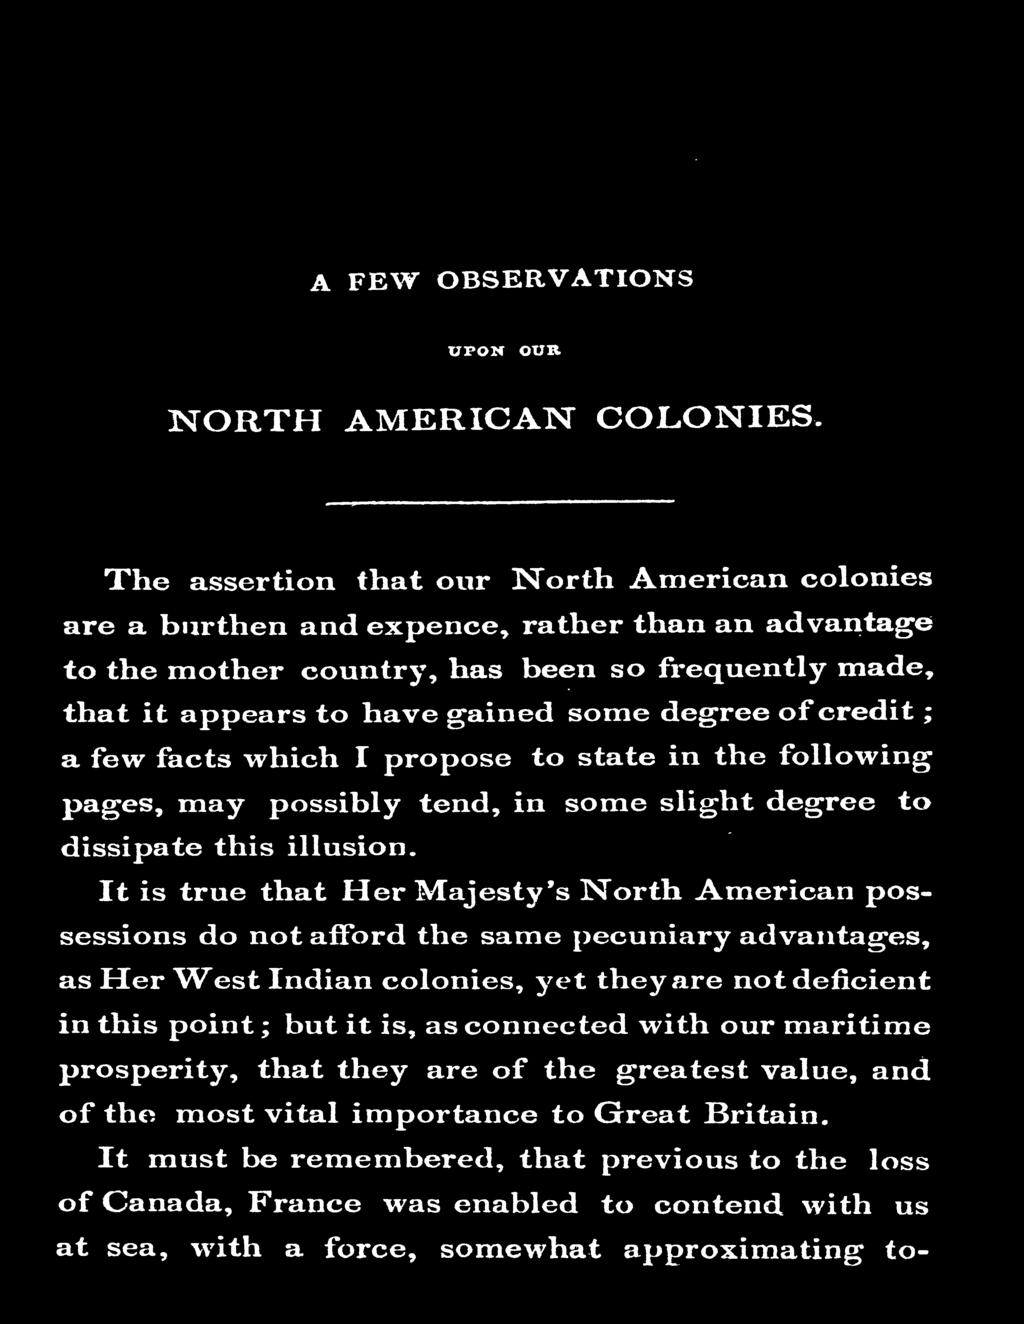 It is true that Her Majesty's North American possessions do not afford the same IJecuniary adva11tages, as Her West Indian colonies, )ret they